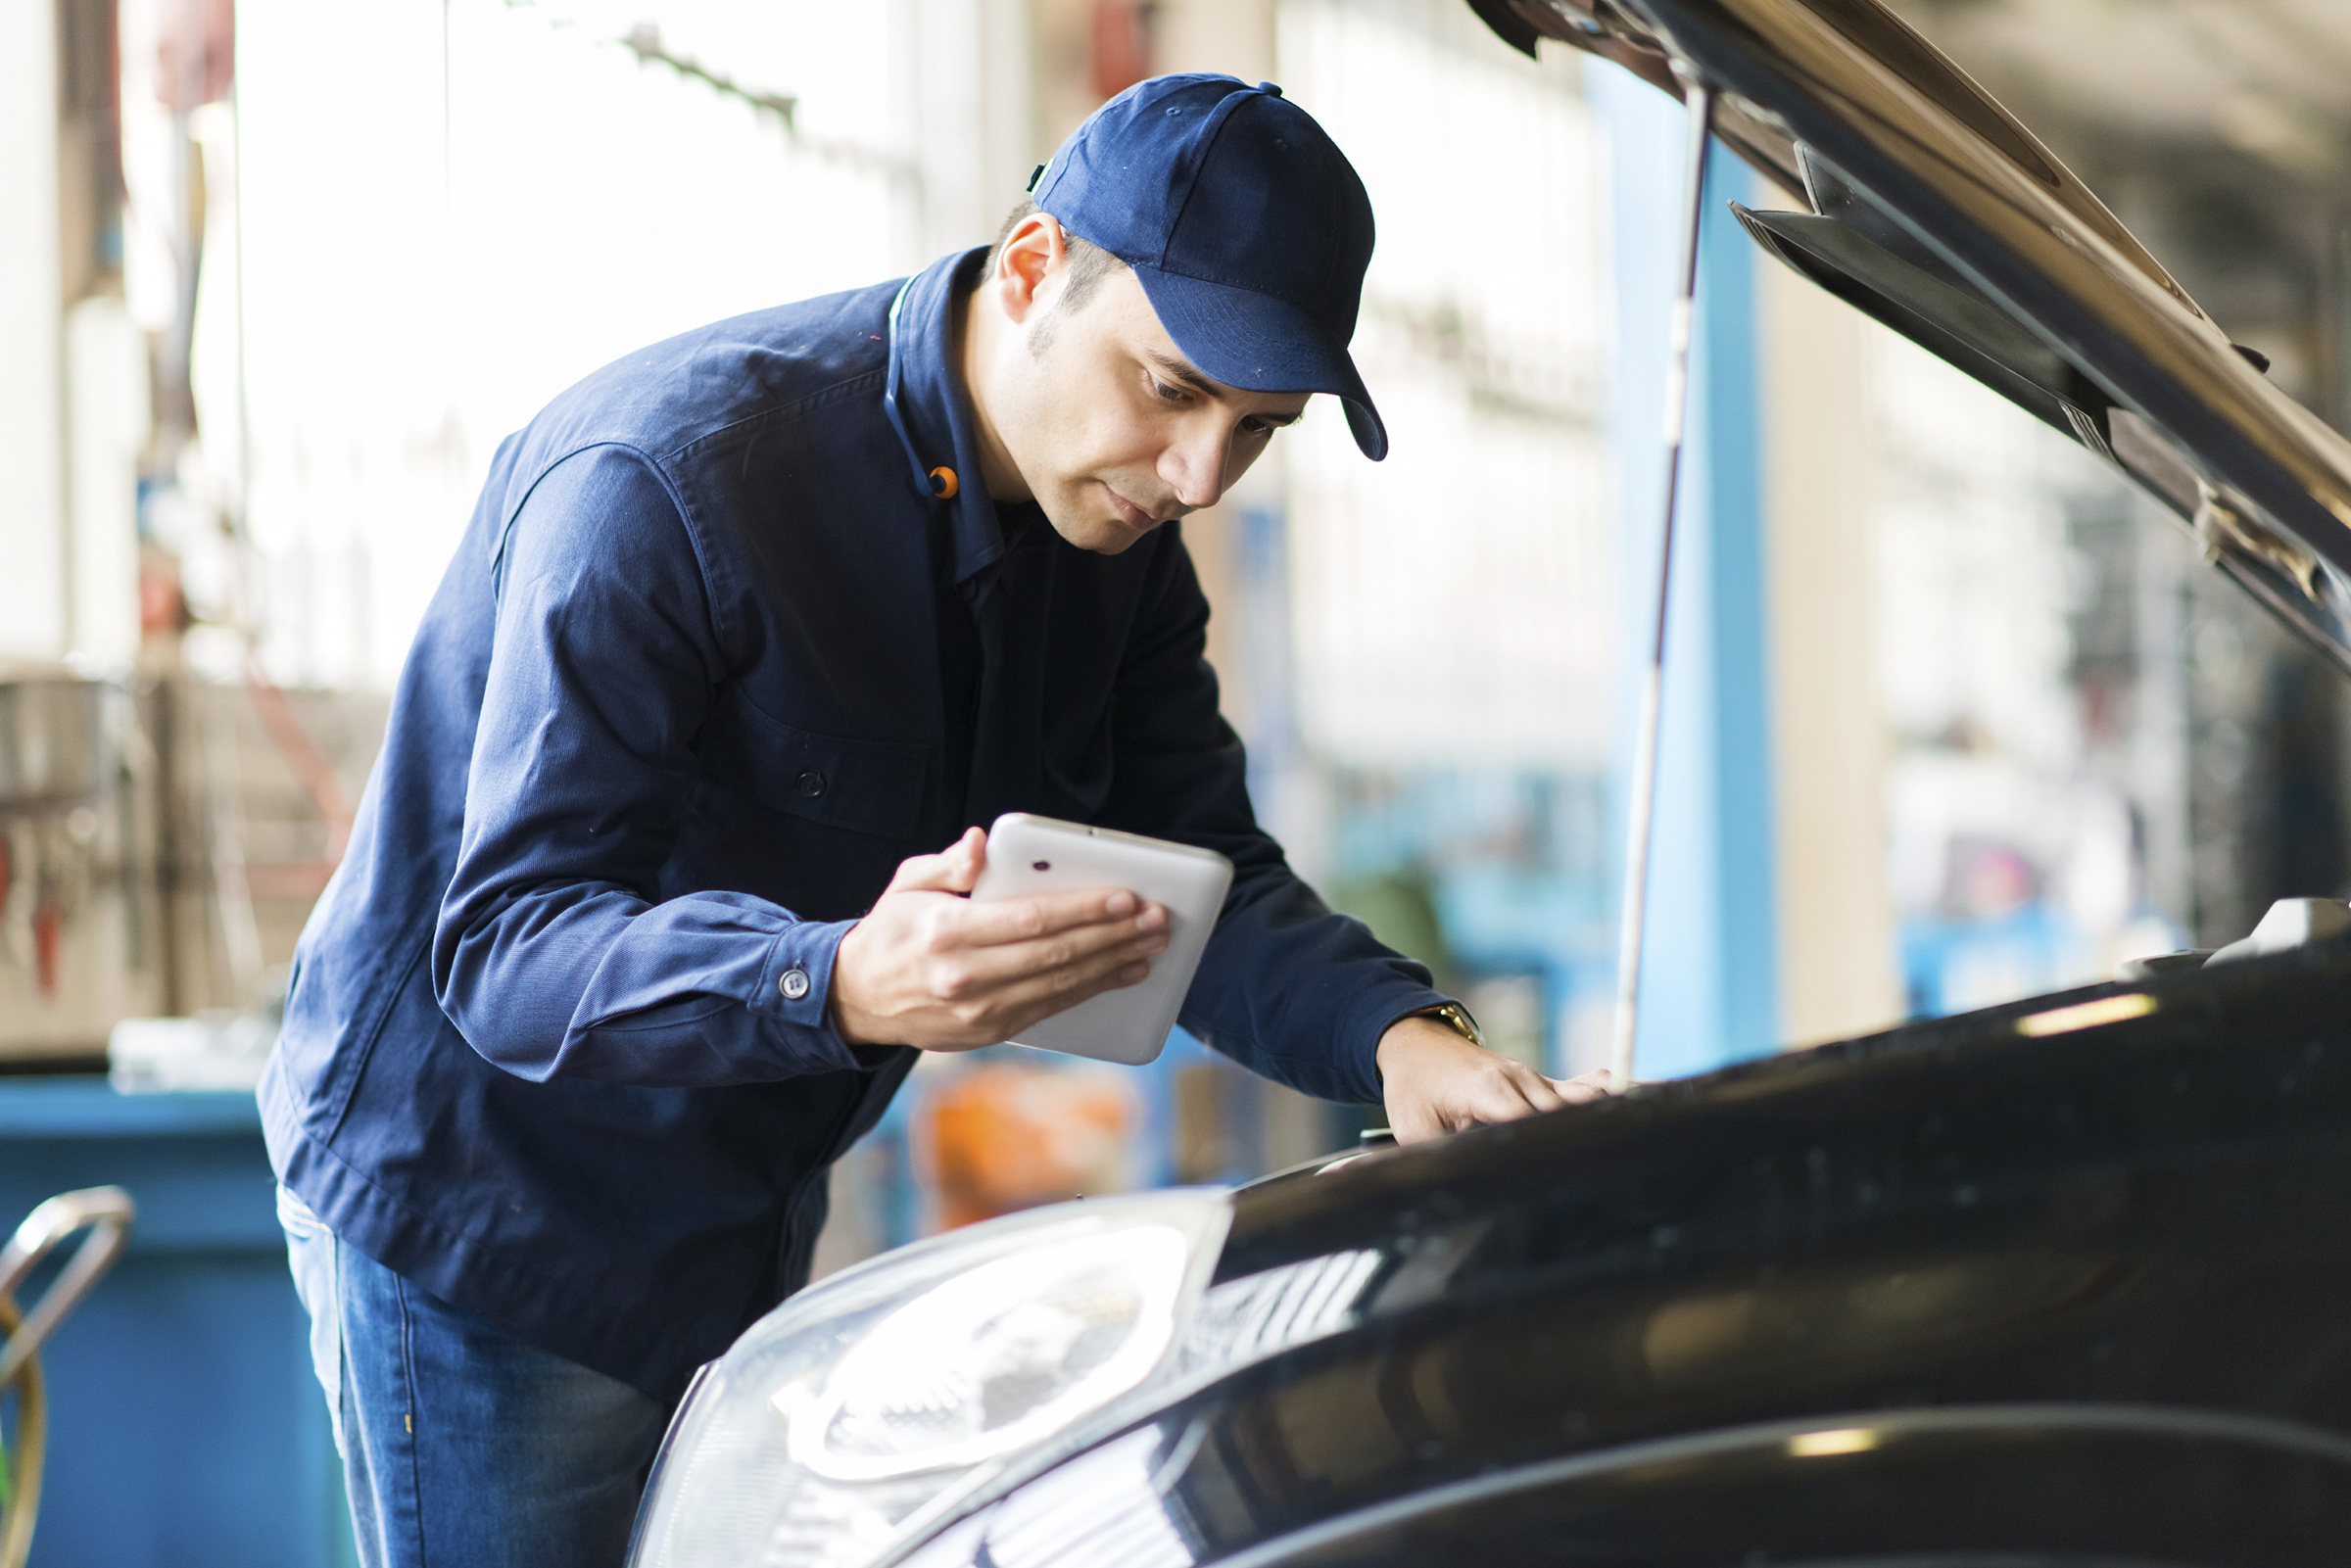 Auto mechanic working on vehicle & looking at data on handheld device